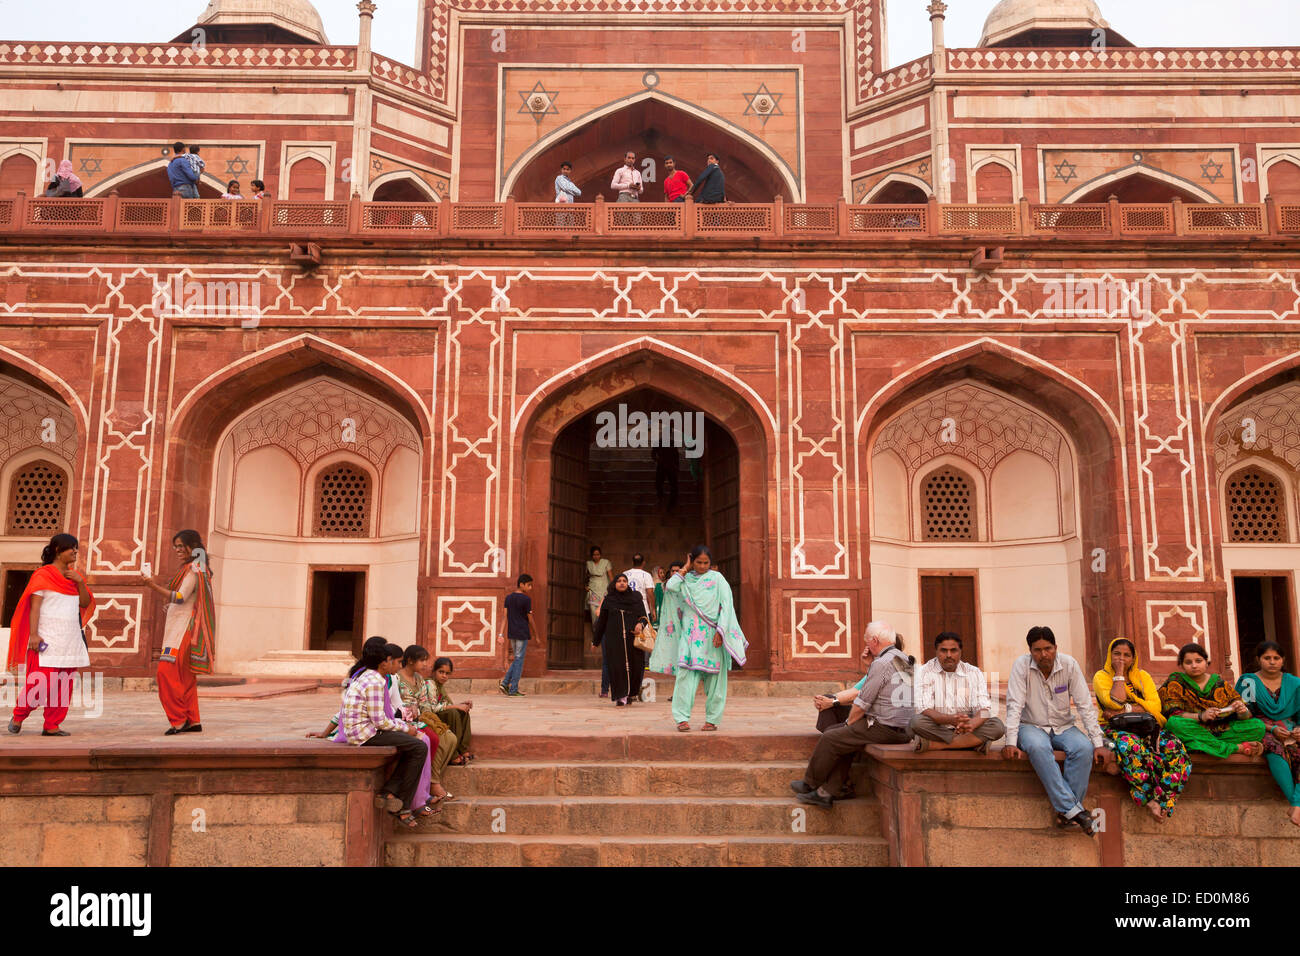 Indian visitors at the entrance to Humayun's Tomb, UNESCO world heritage in Delhi, India, Asia Stock Photo